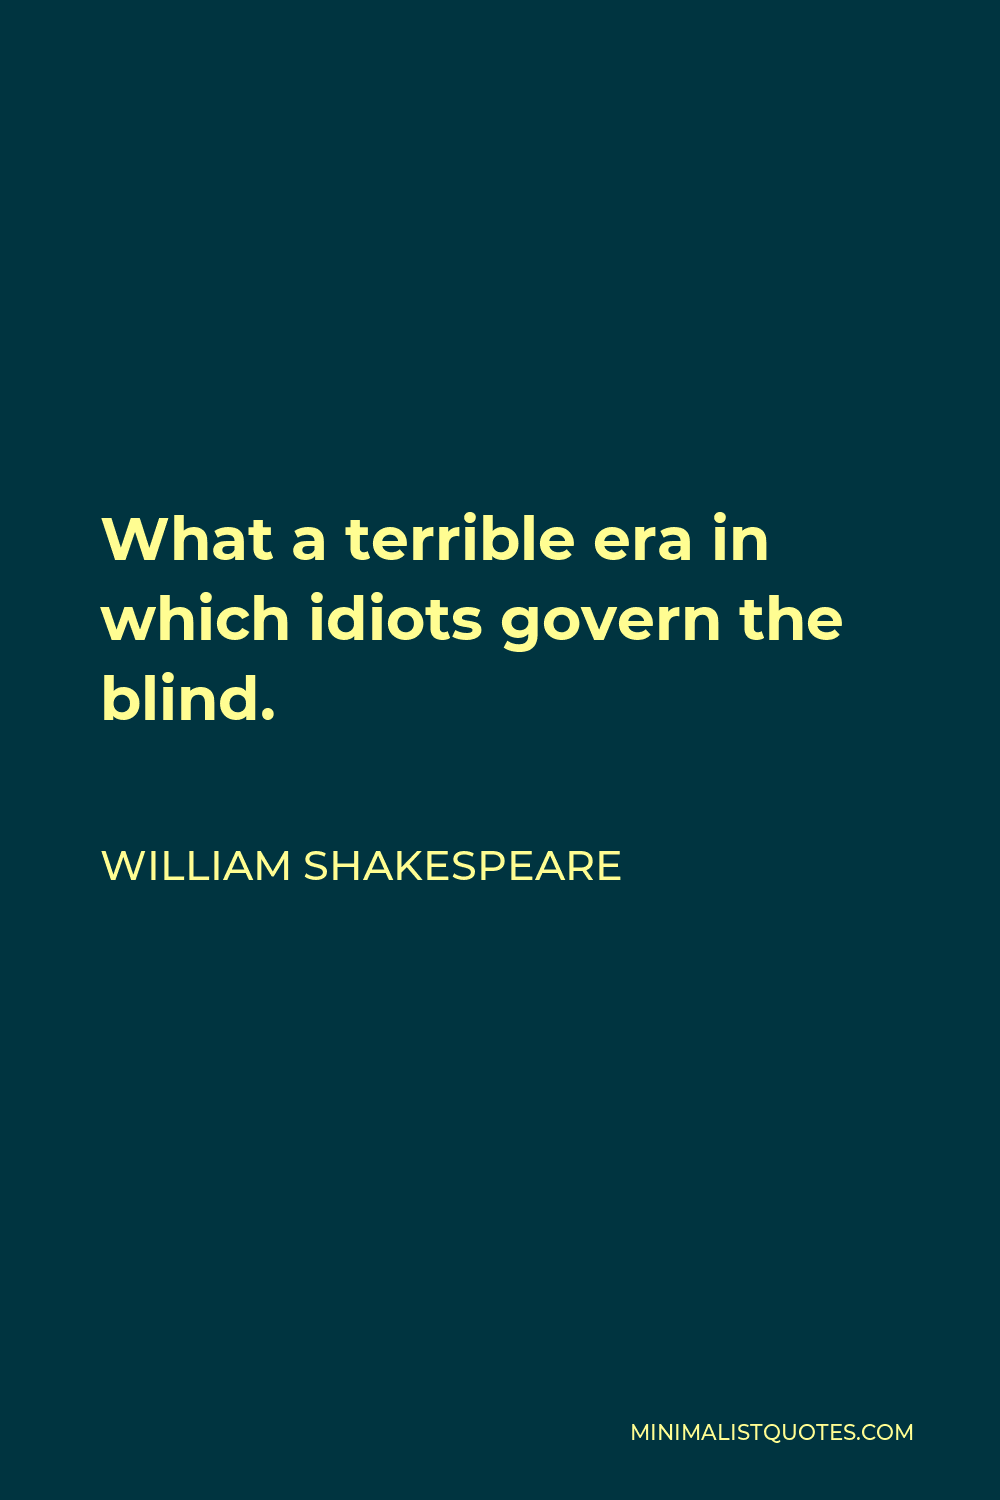 William Shakespeare Quote - What a terrible era in which idiots govern the blind.